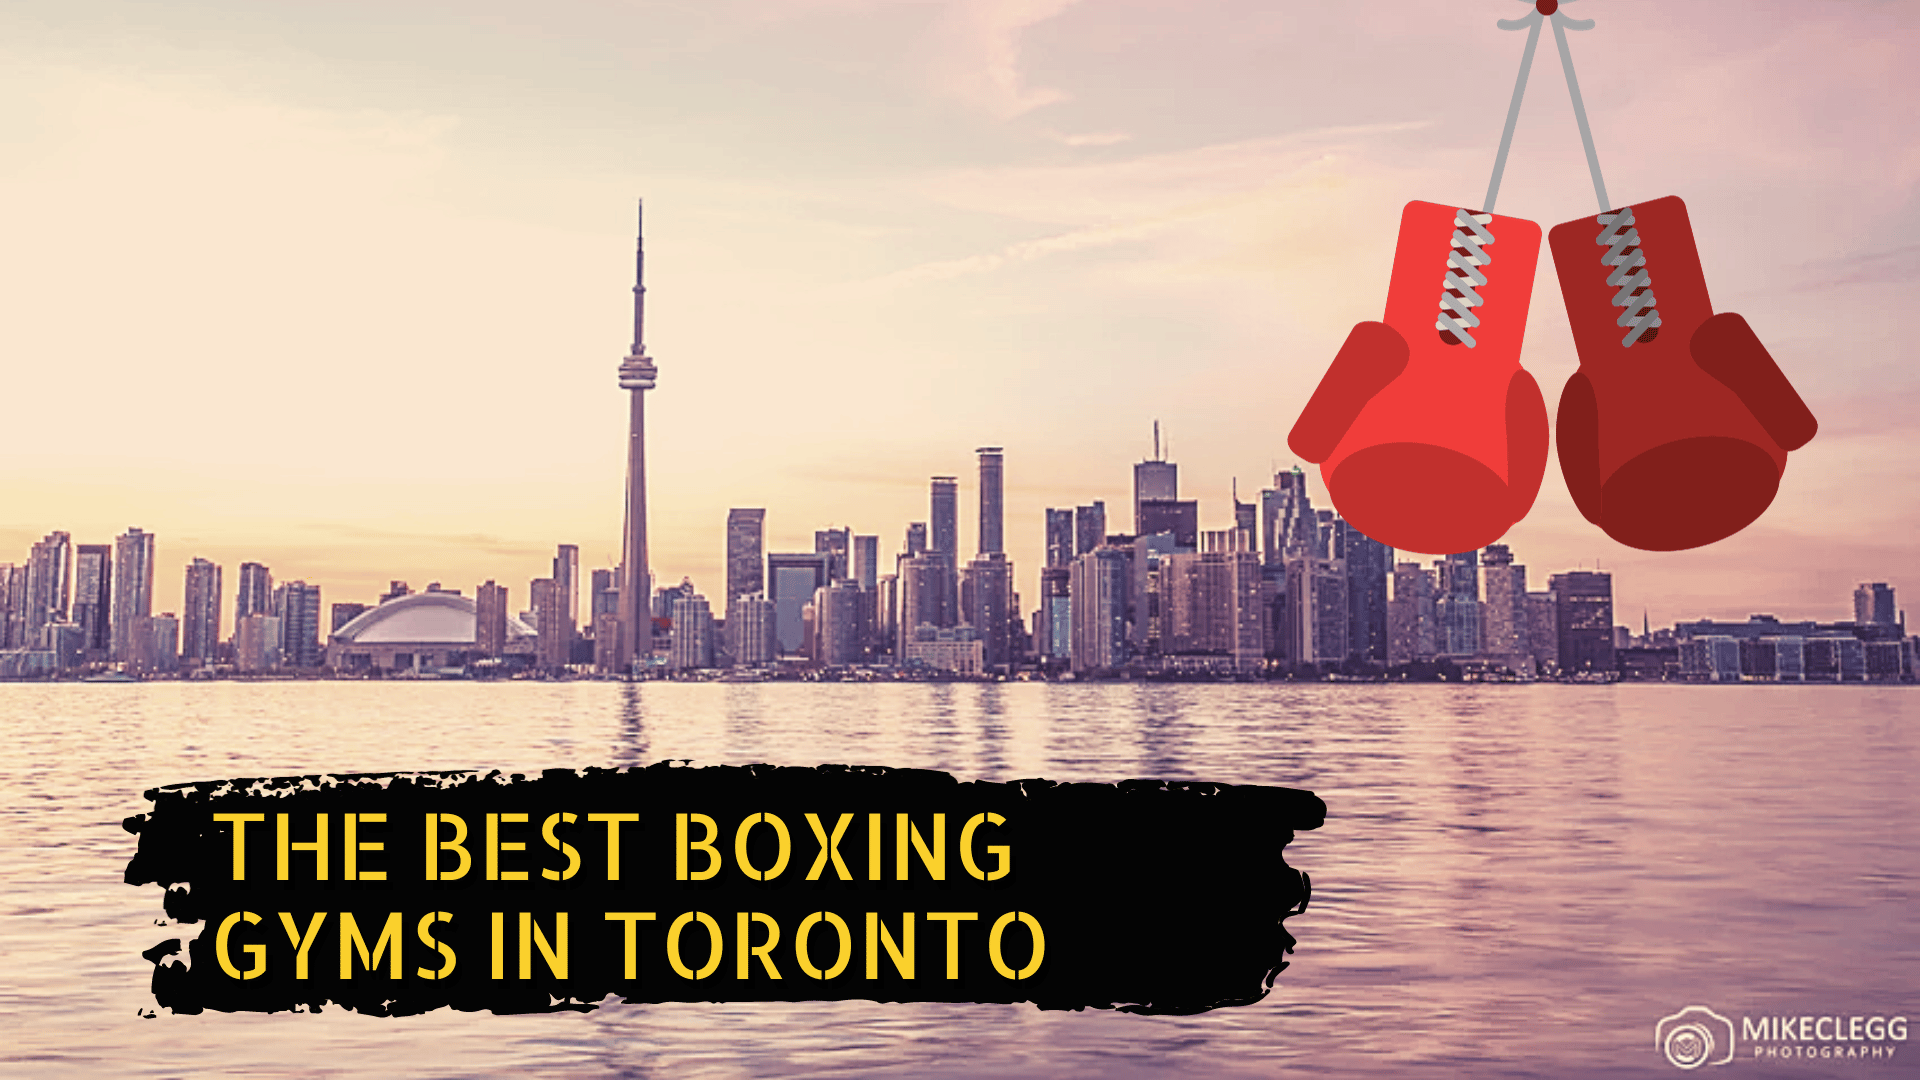 Toronto skyline, some boxing gloves, and the title the best boxing gyms in Toronto